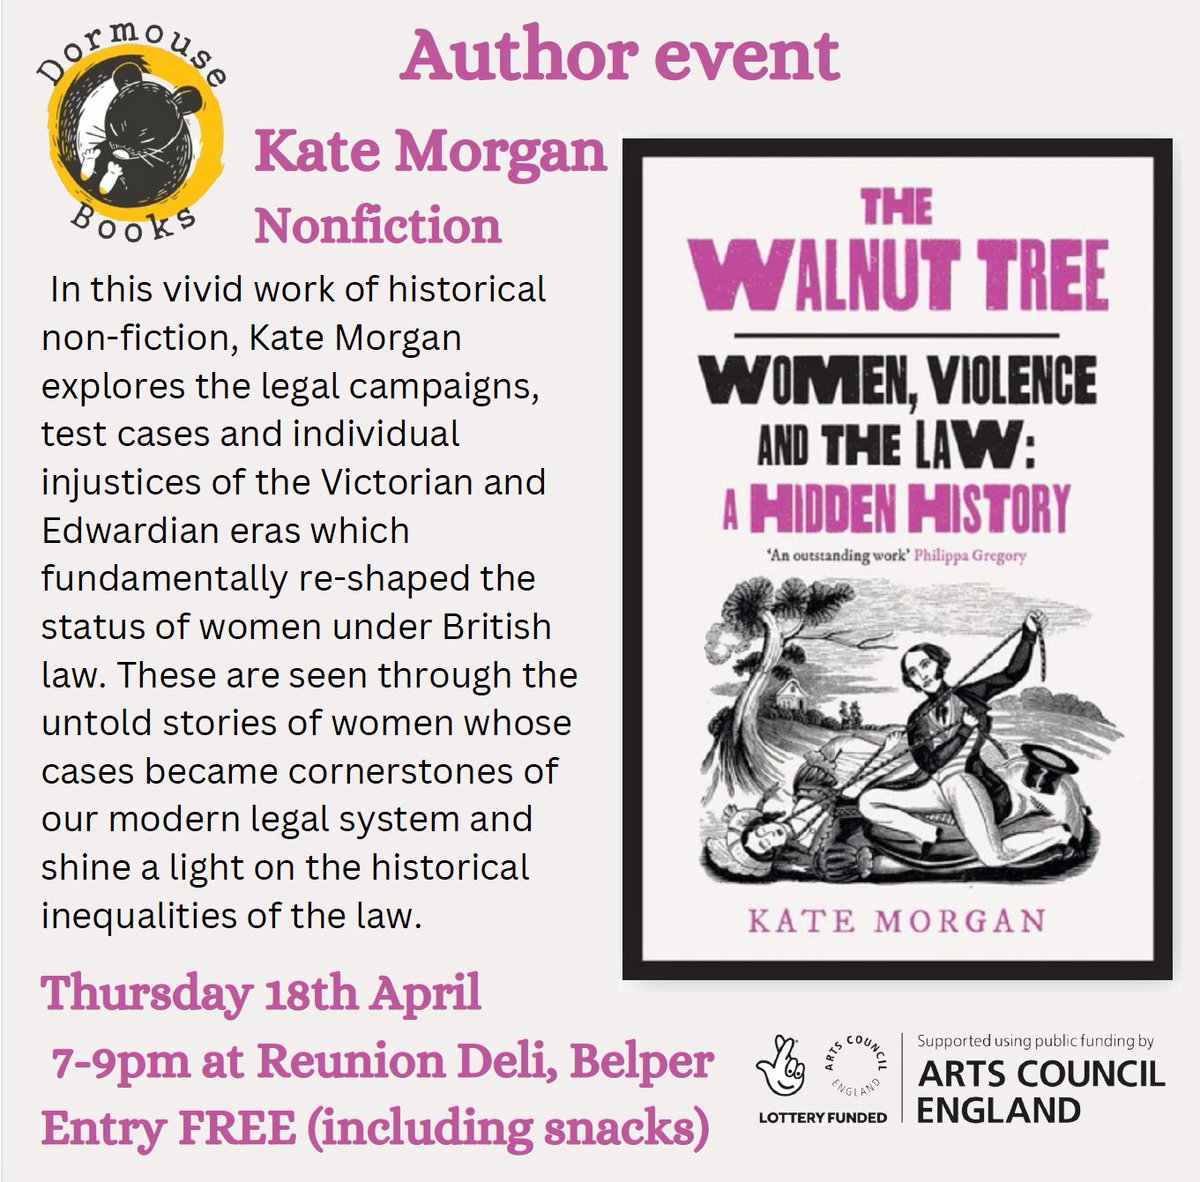 Our next event at Dormouse is with Kate Morgan discussing her book The Walnut Tree. A devastating work of non-fiction that reveals a hidden history of women, violence and the law.